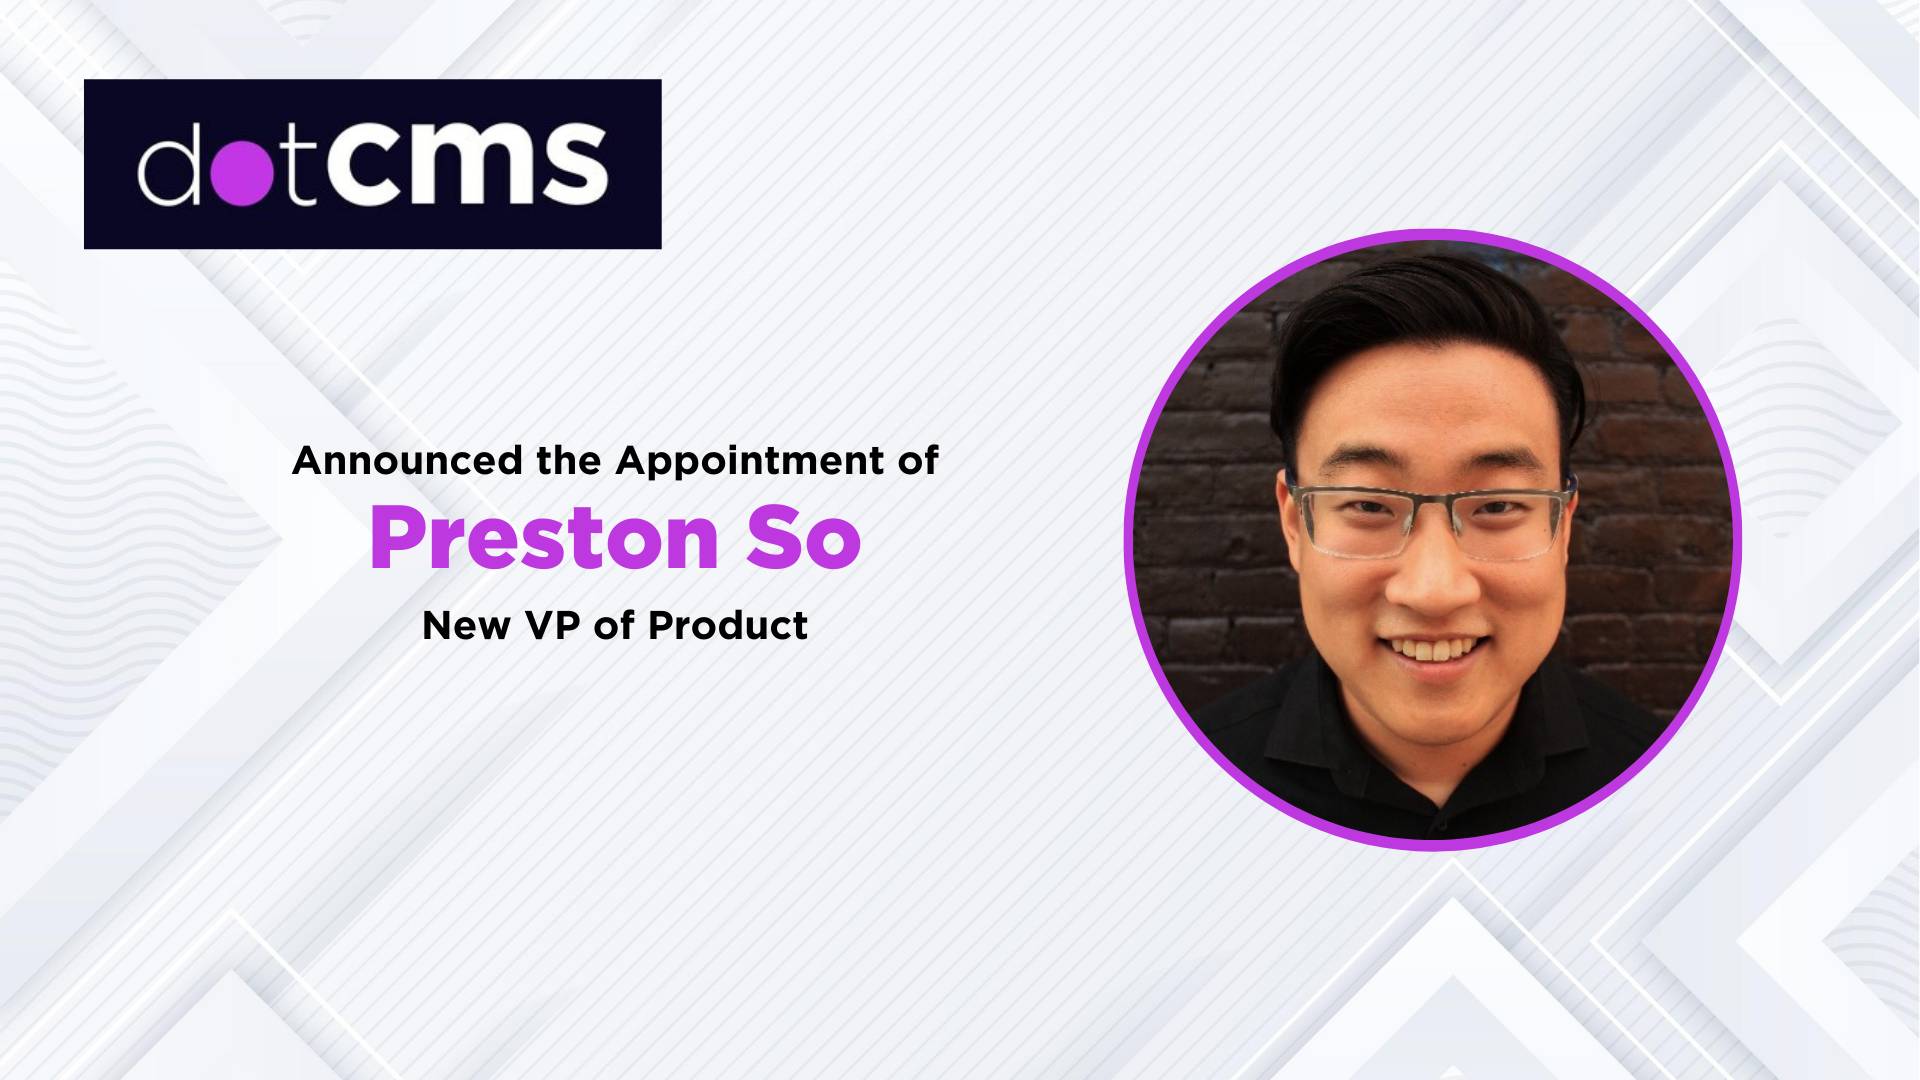 dotCMS announces new Vice President of Product, Preston So